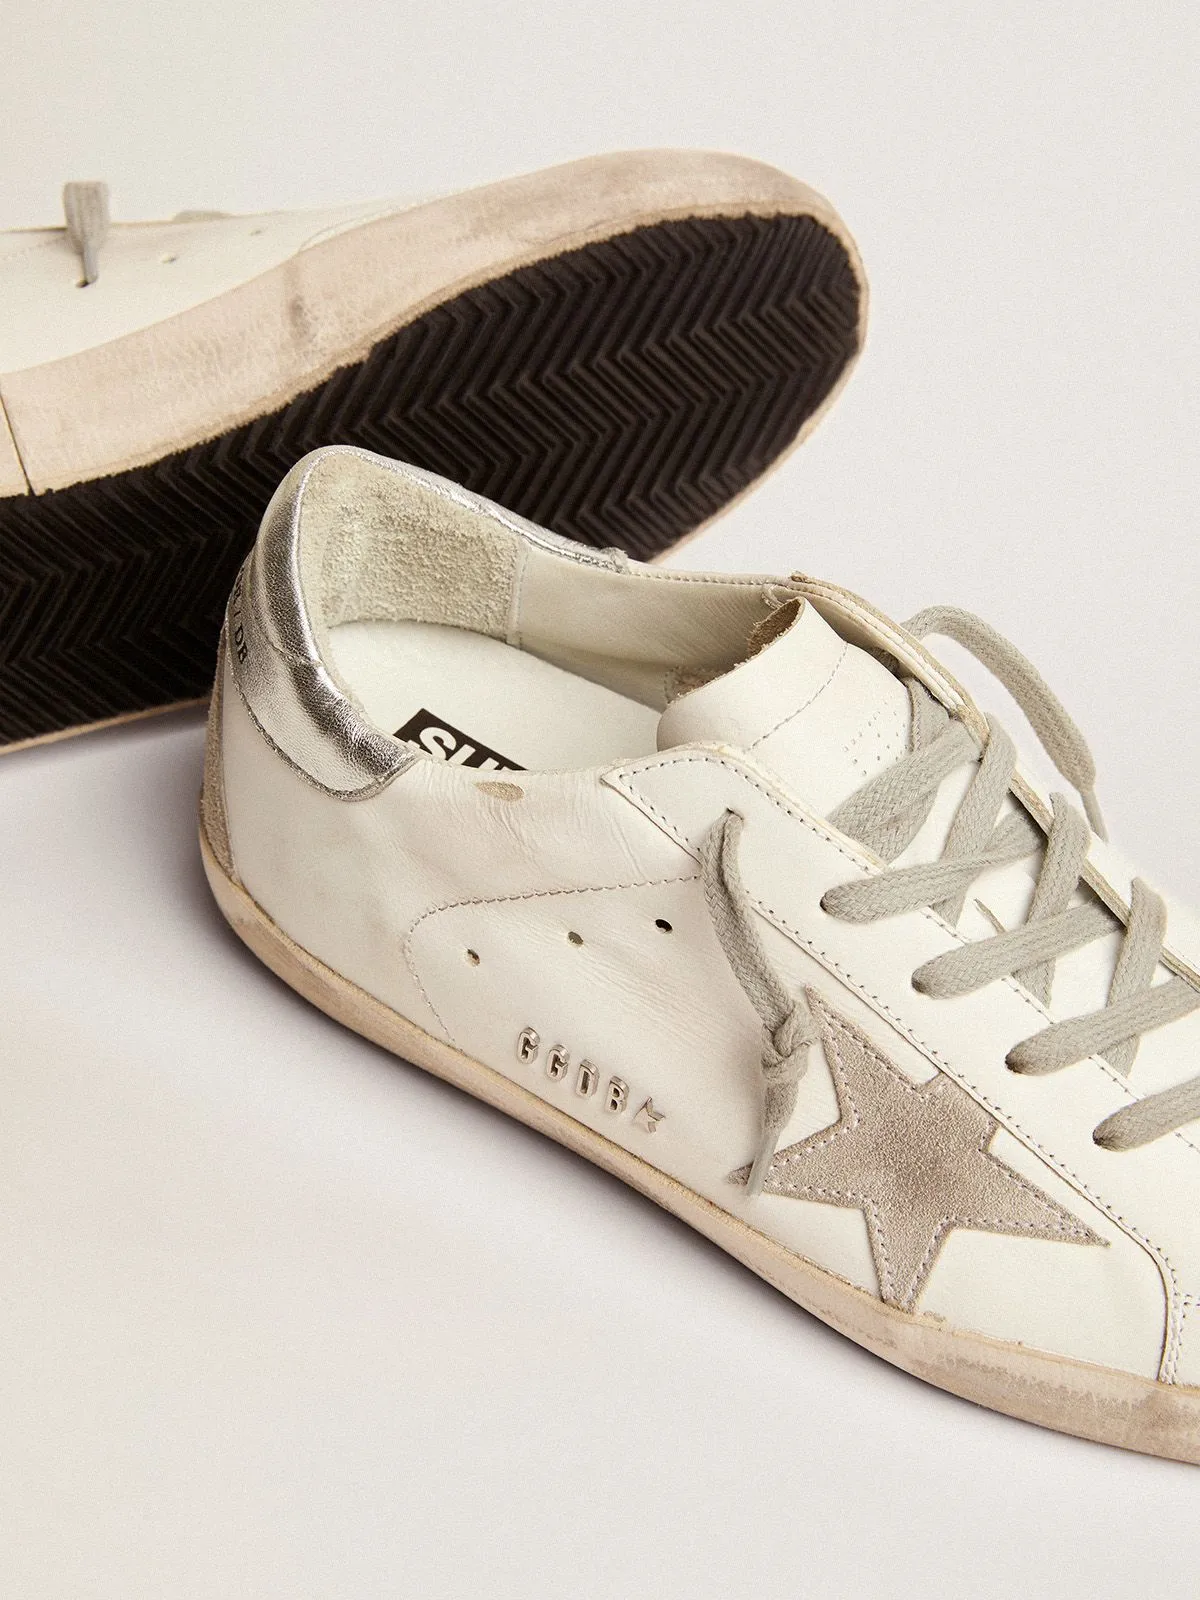 White leather Super-Star sneakers with glittery heel tab